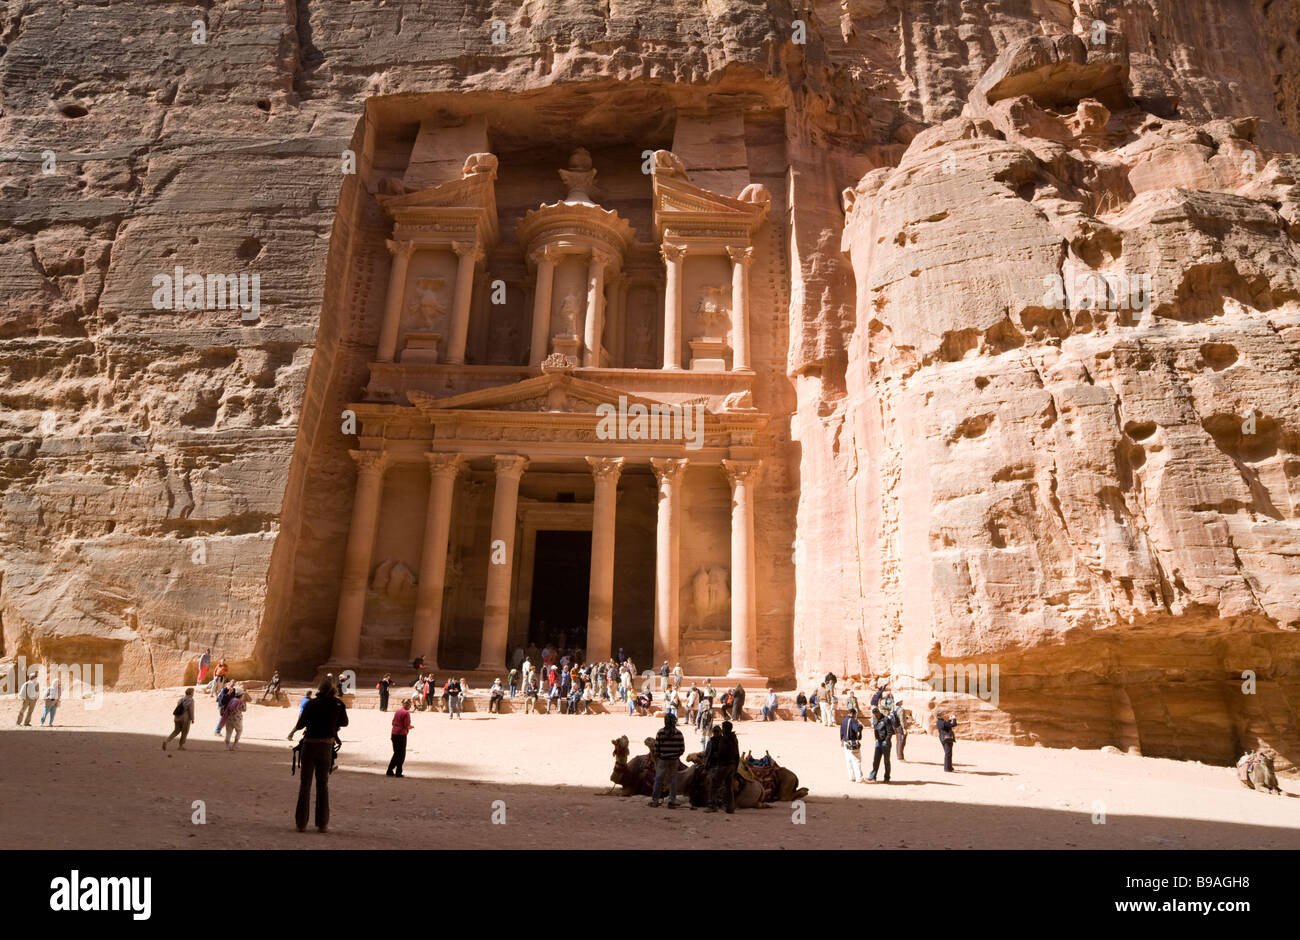 Camels and tourists in front of the Treasury, Petra Jordan, Middle East Stock Photo